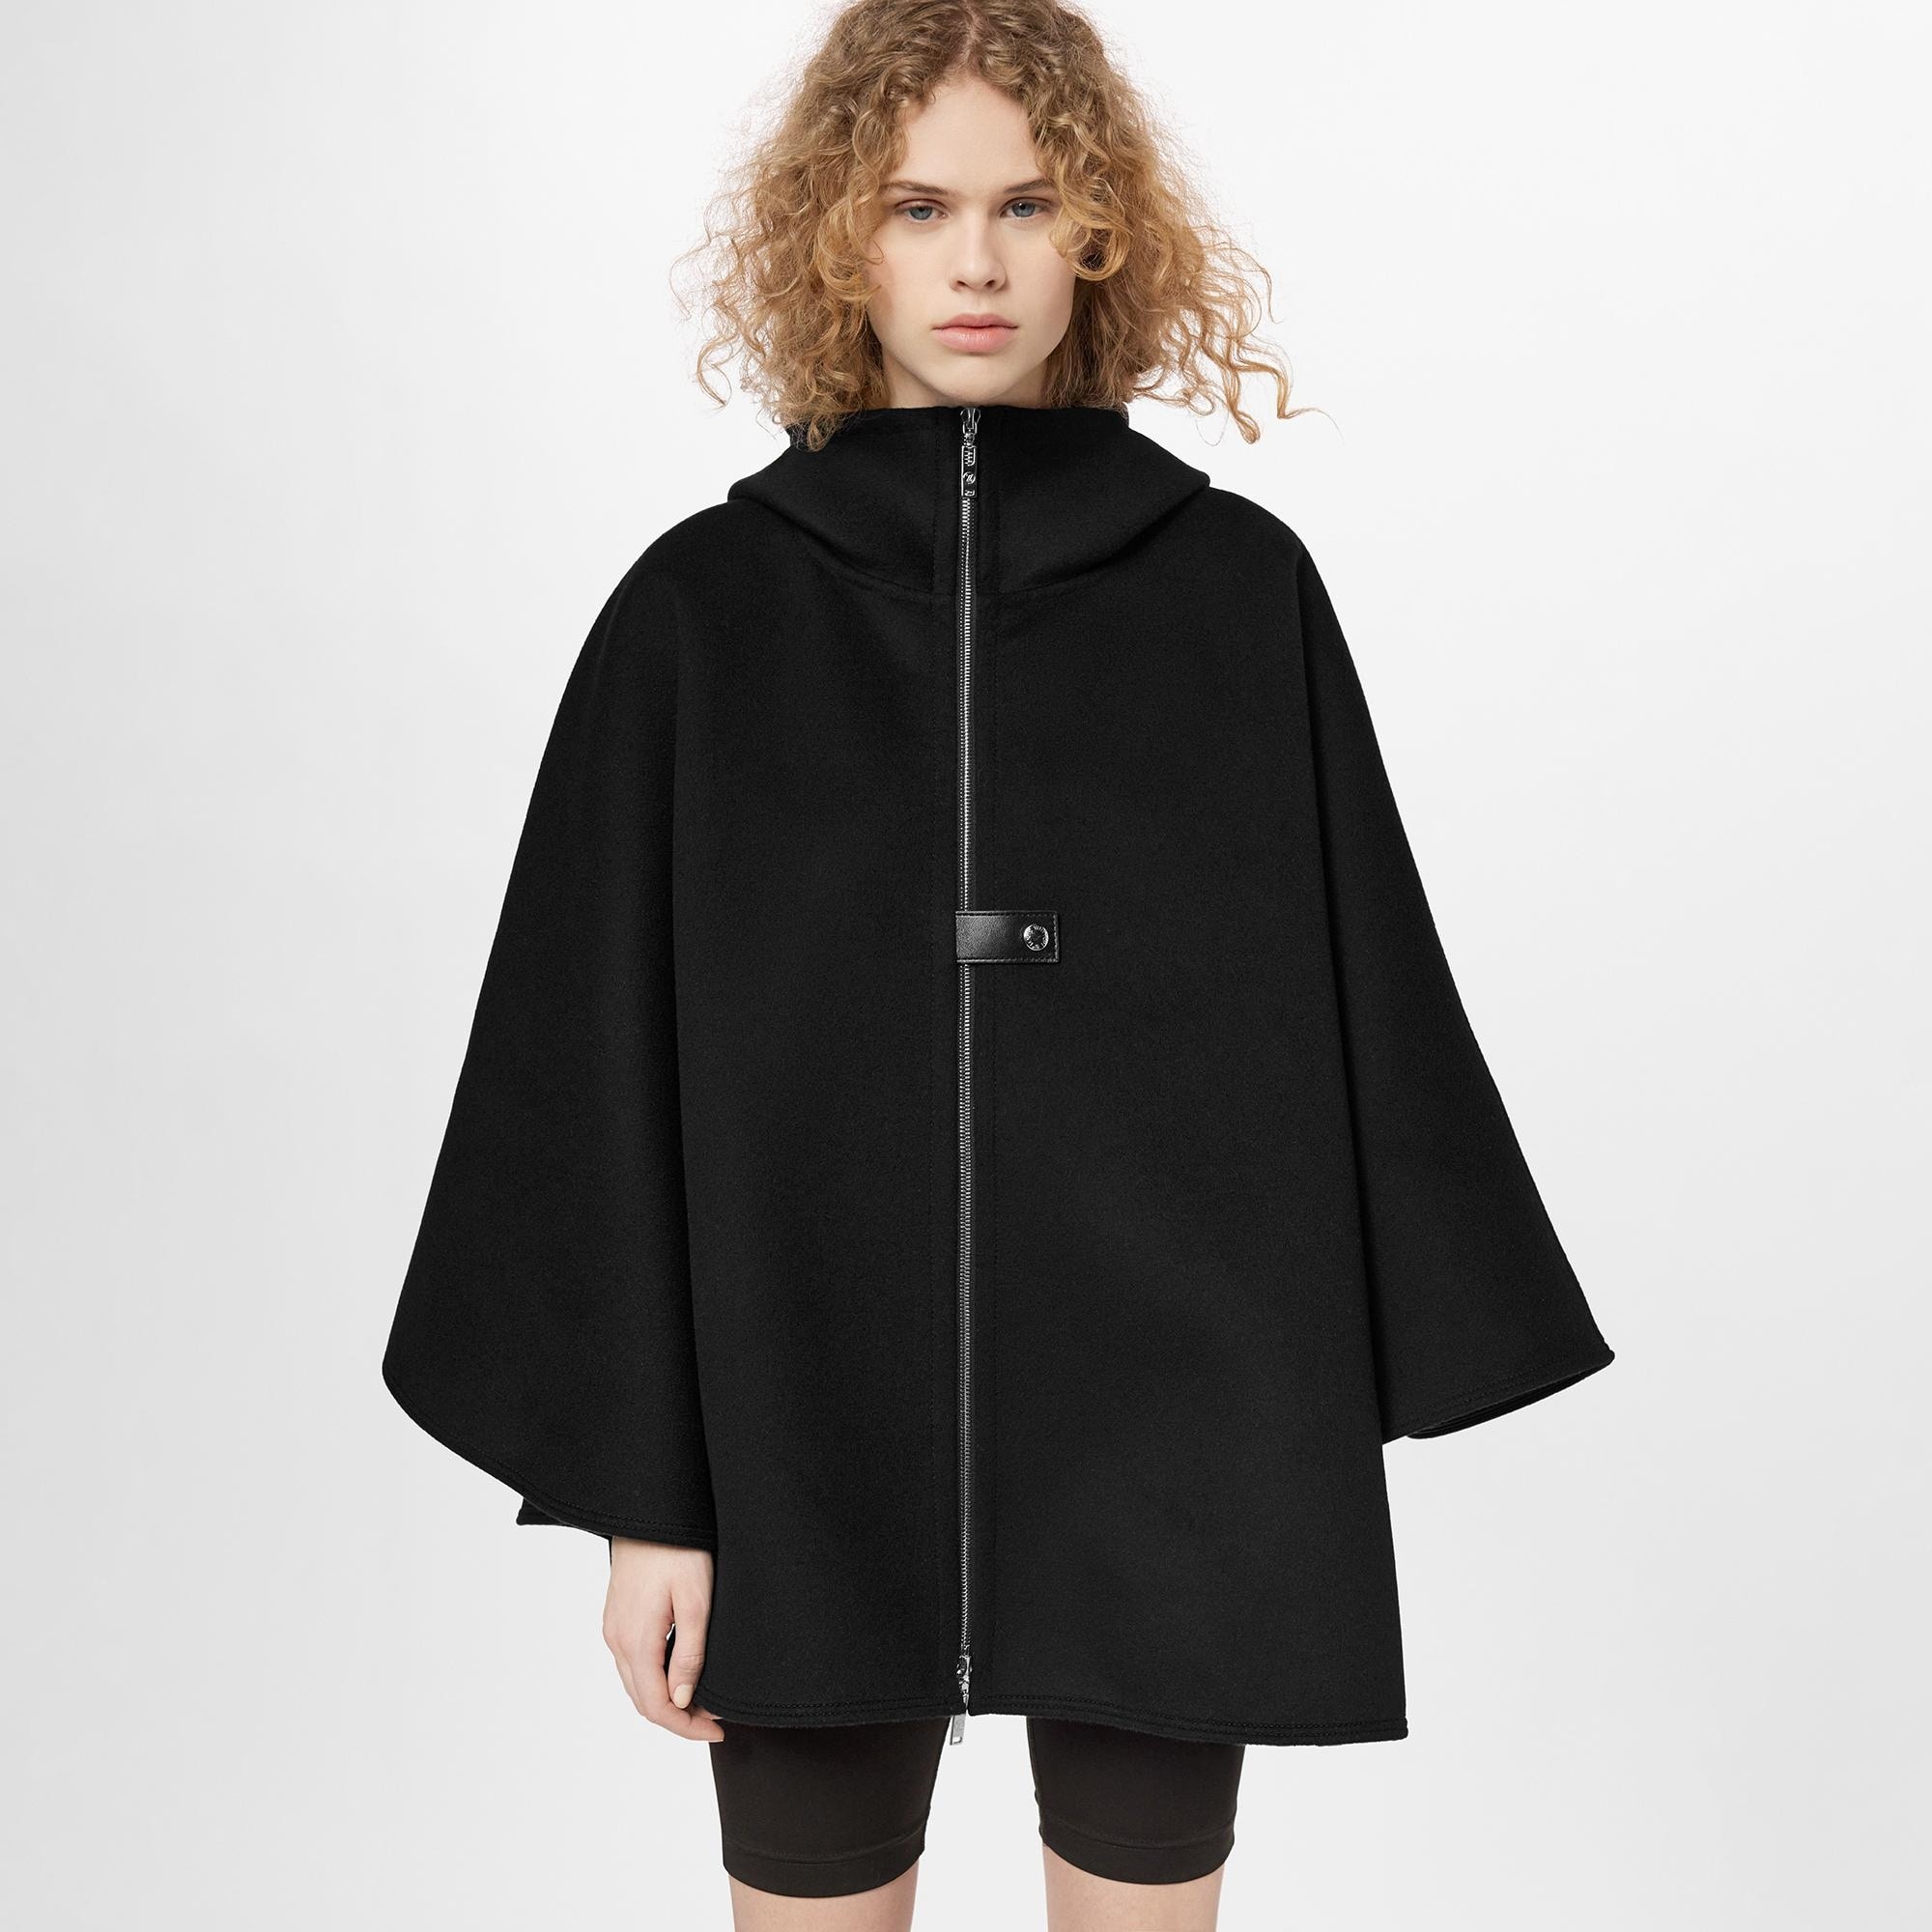 Hooded Cape - 4